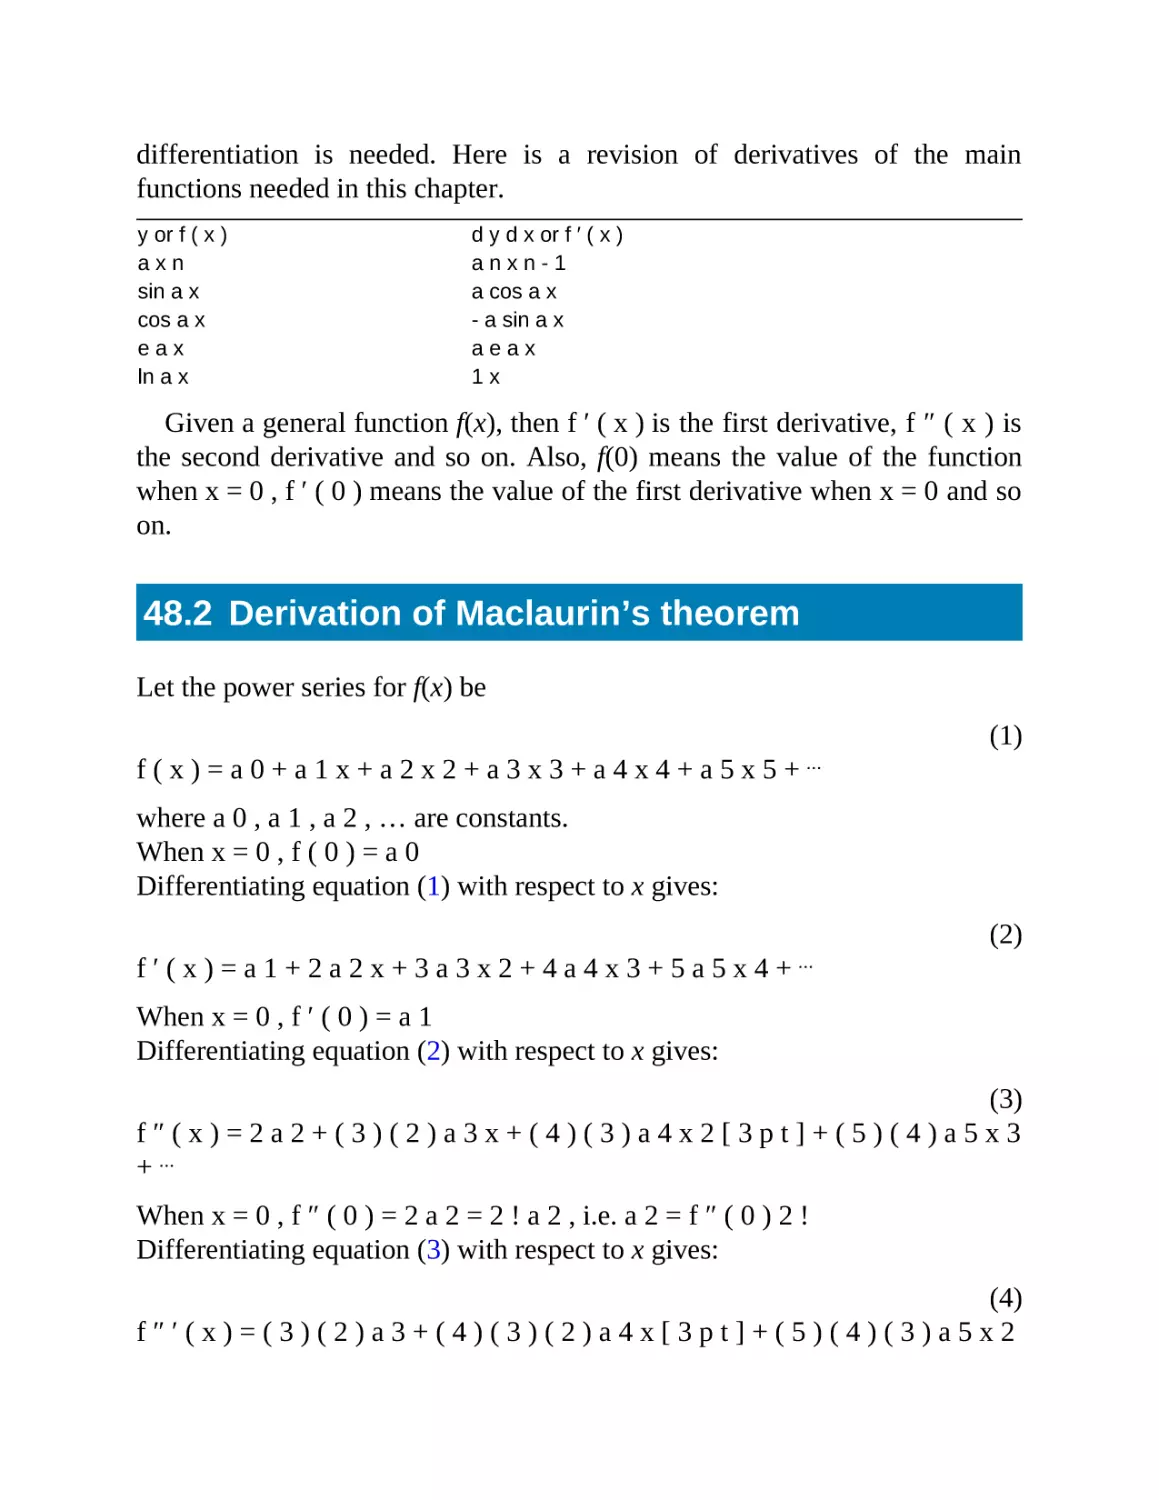 48.2 Derivation of Maclaurin’s theorem